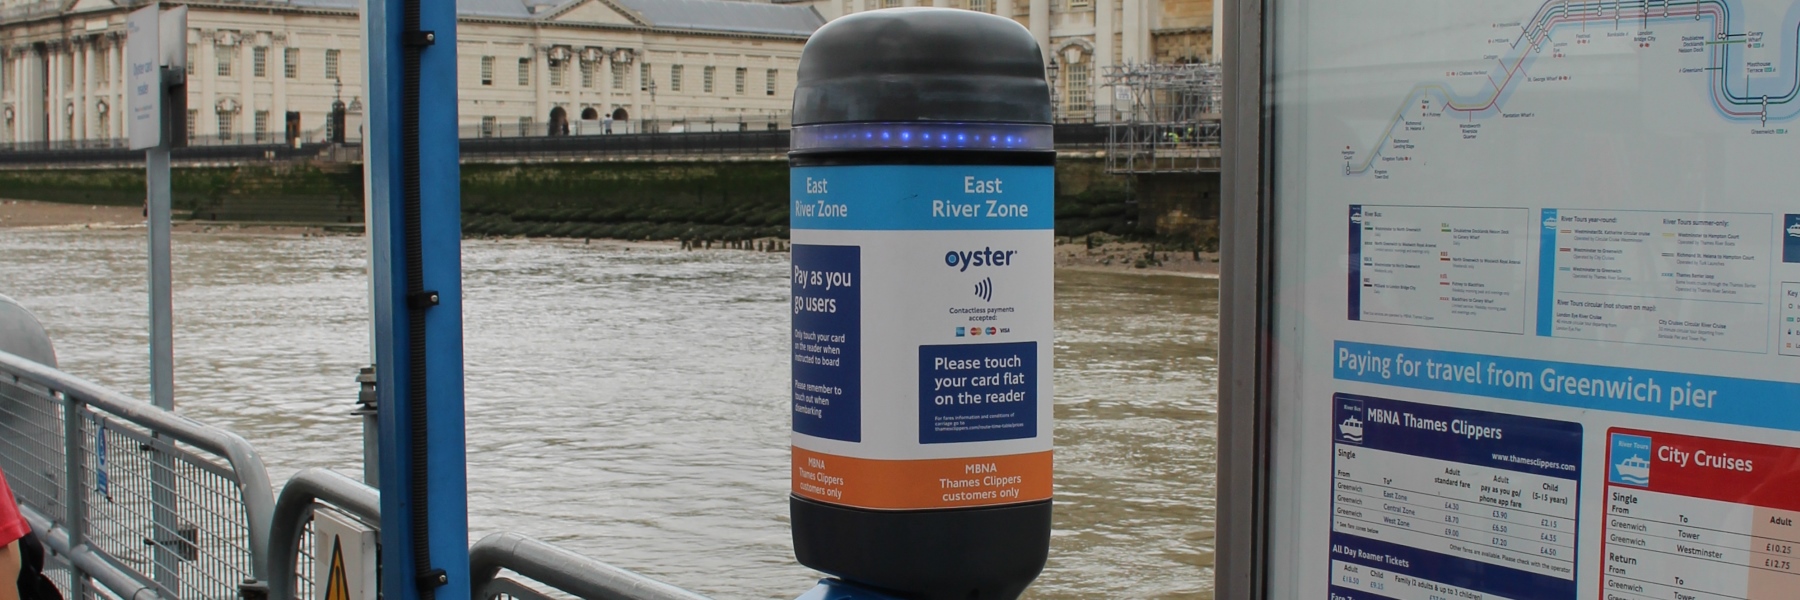 London river Oyster signage